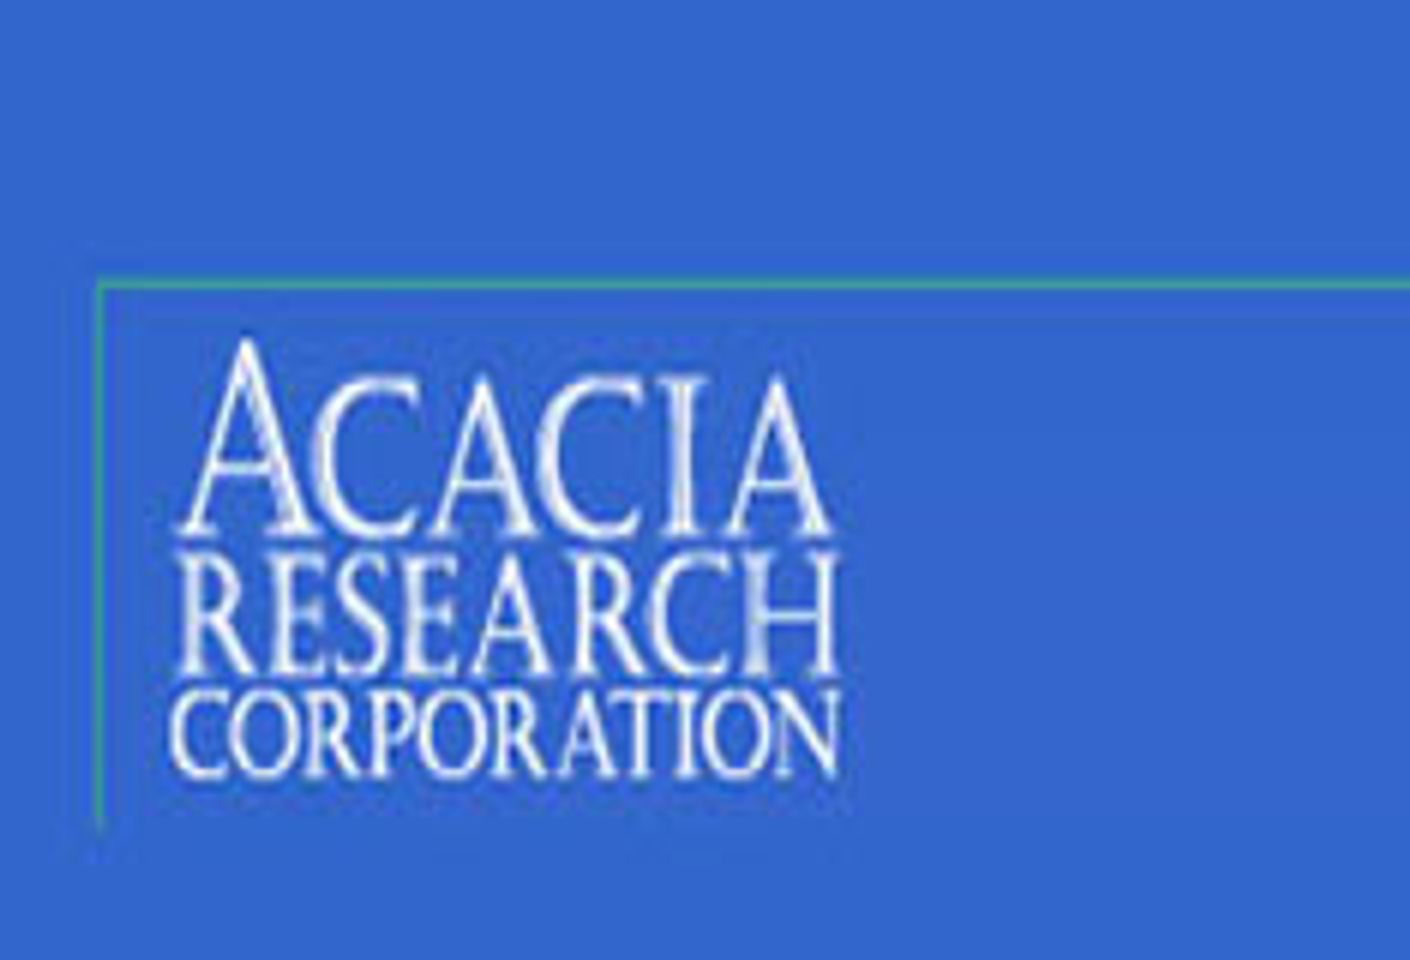 Acacia Finalizes Licenses With Two Adult Net Players